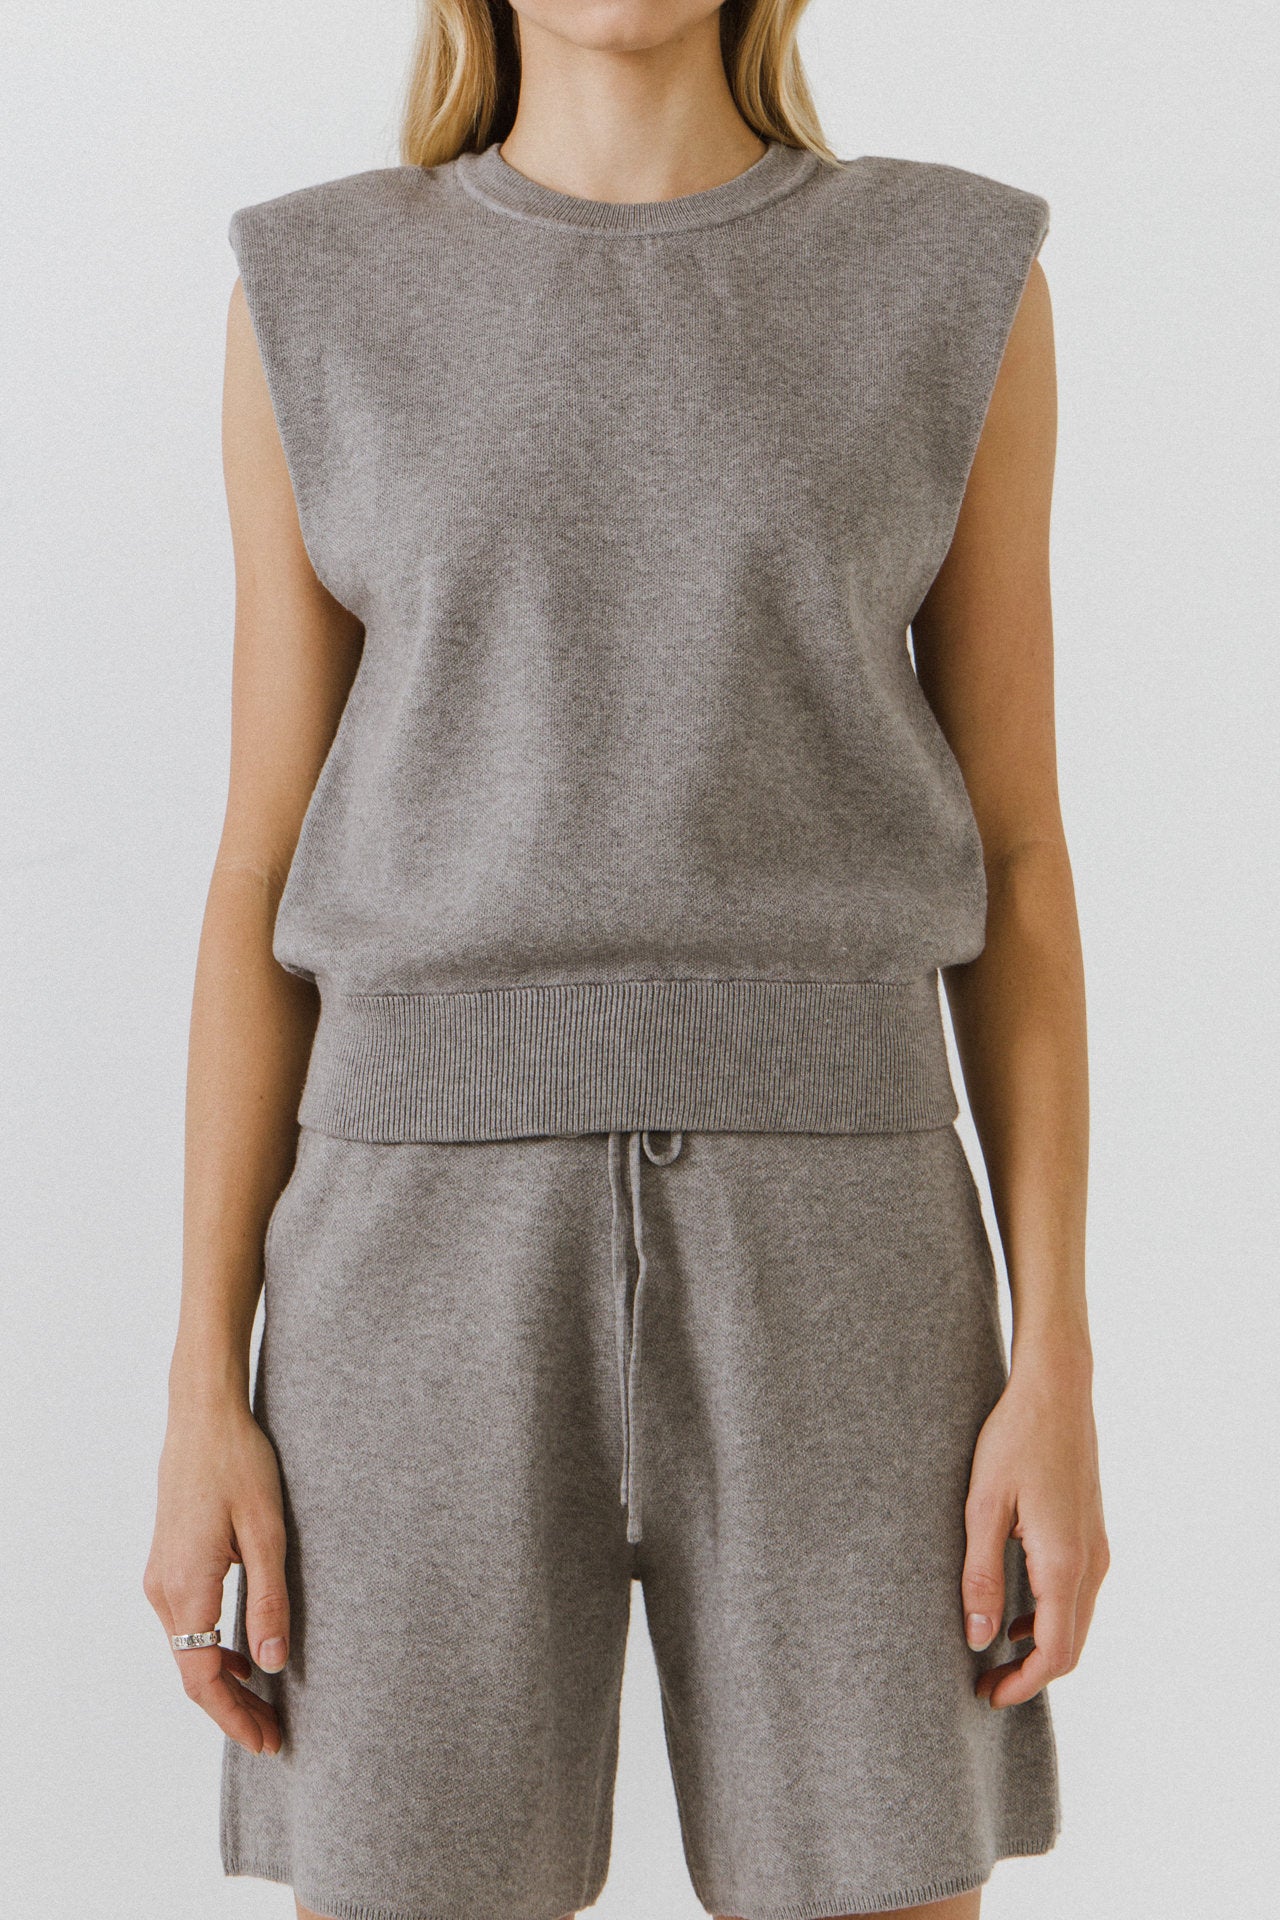 ENDLESS ROSE - Shoulder Padded Knit Top - SWEATERS & KNITS available at Objectrare